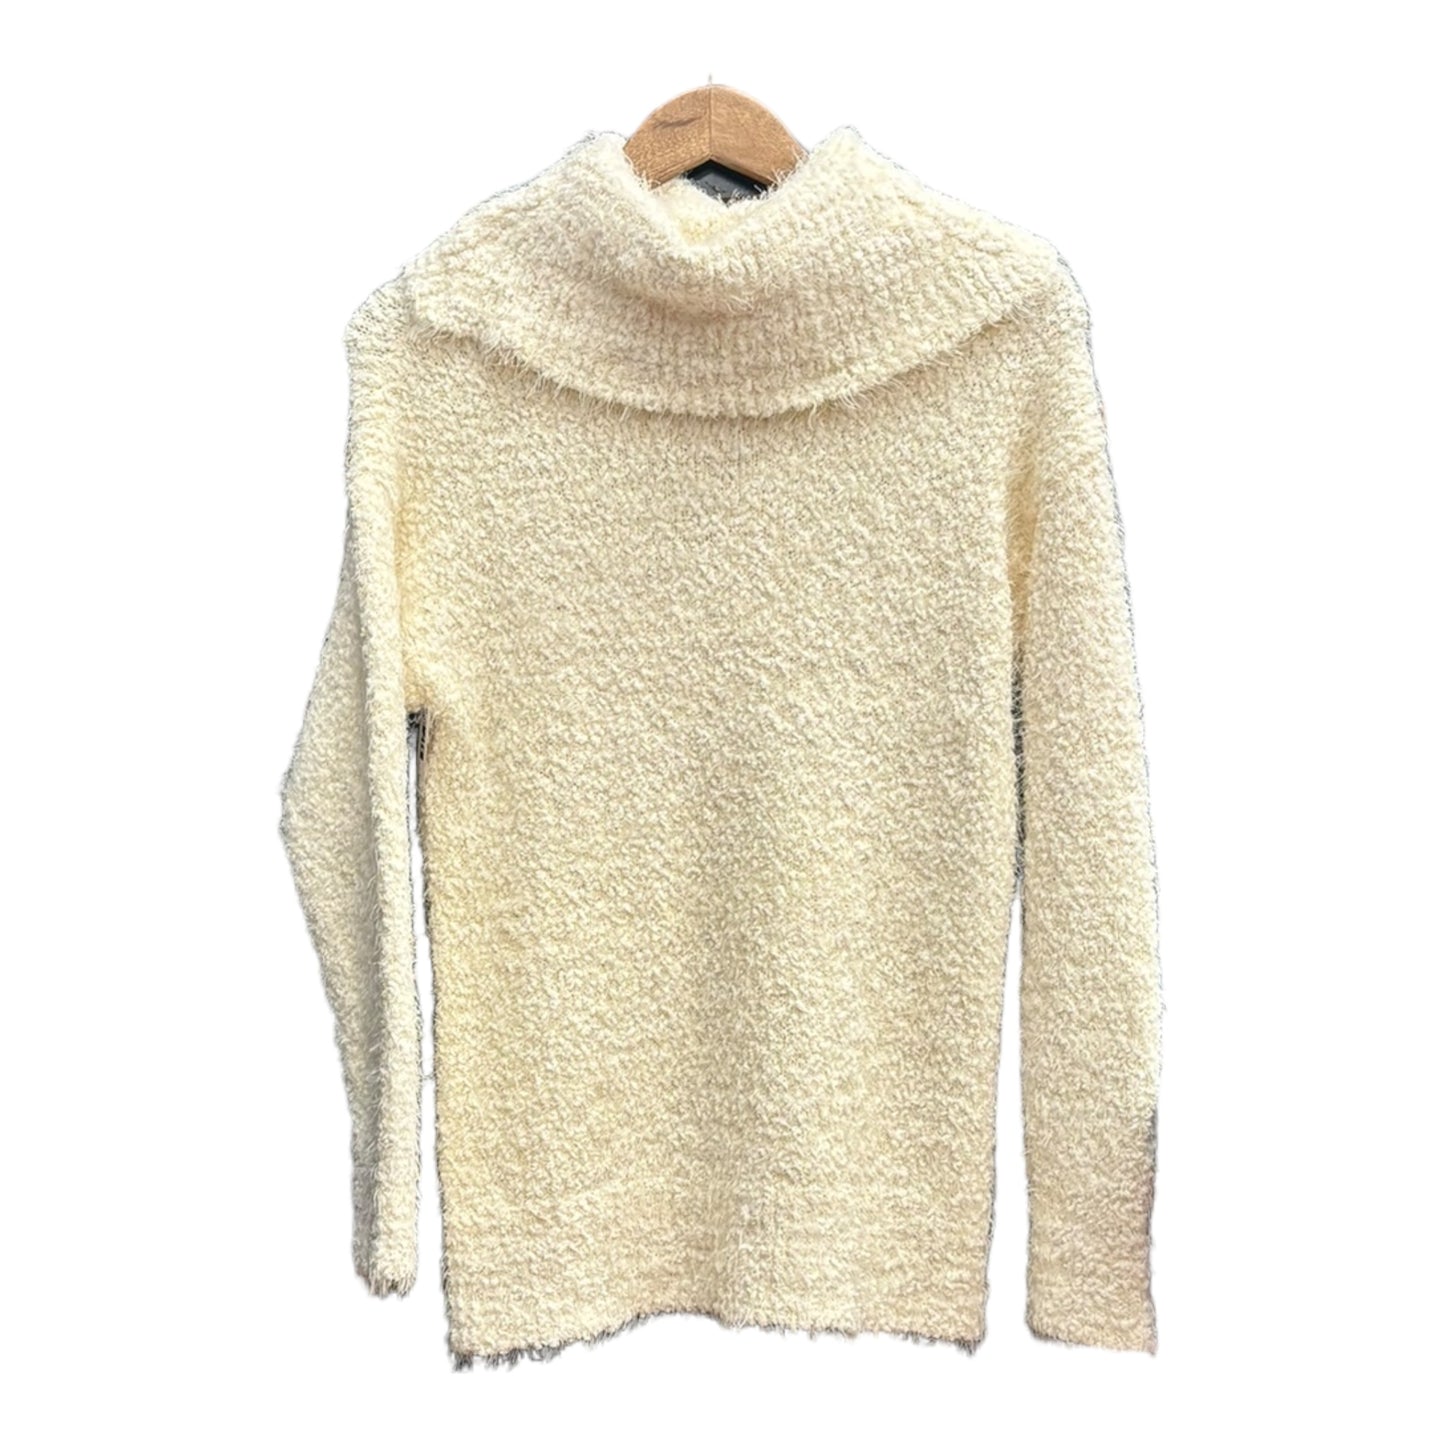 Sweater By Entro  Size: M